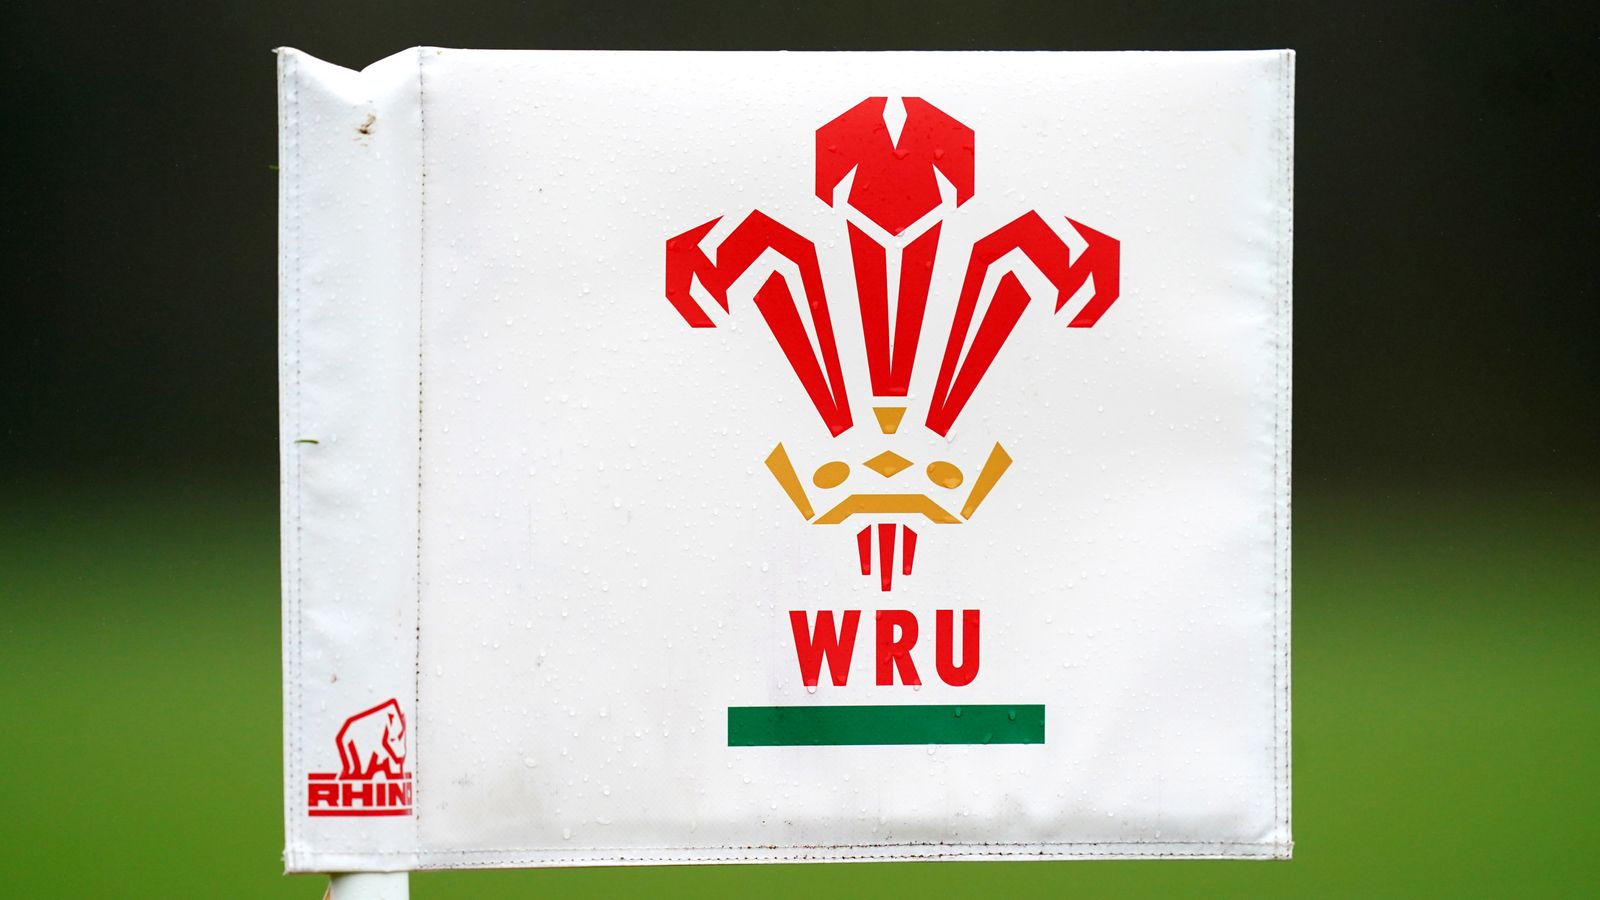 WRU investigation: Welsh Rugby Union chairman Ieuan Evans reacts to ‘distressing’ allegations of bullying and sexism inside organisation | Rugby Union News